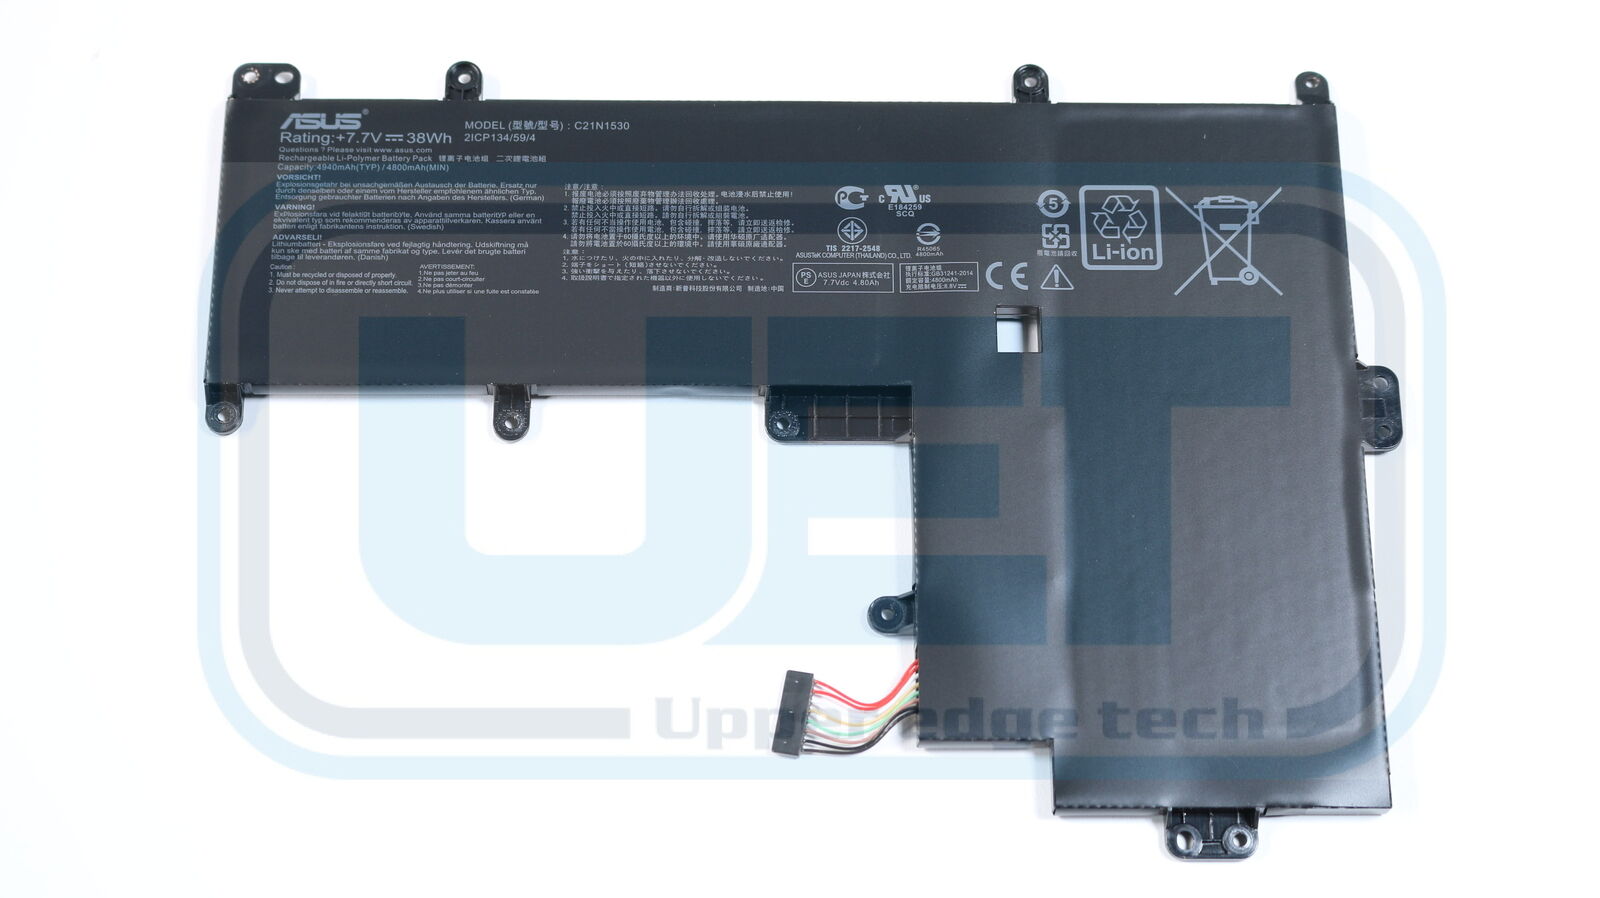 New Asus Chromebook C202SA Genuine Battery 0B200-01990100 2Cell 38Whr Tested